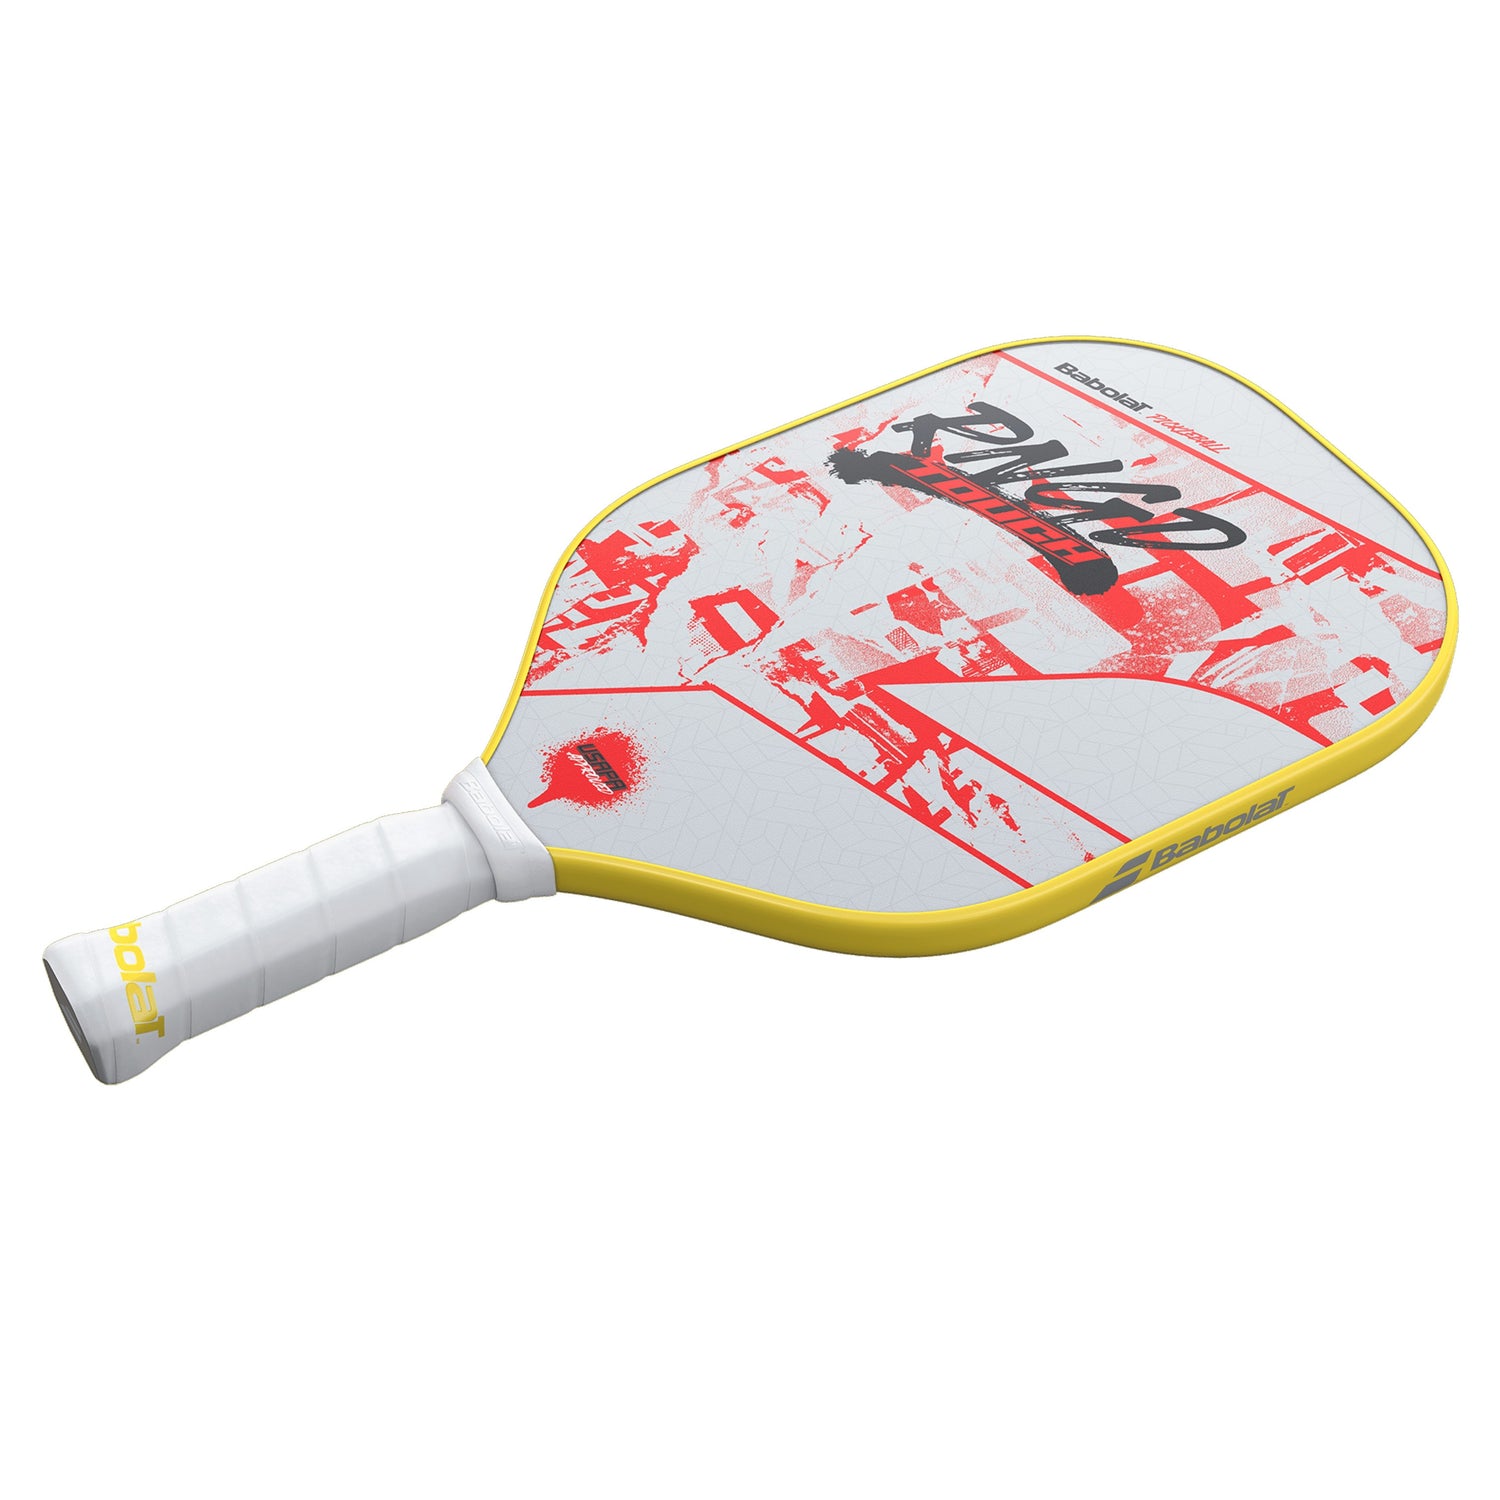 Babolat RNGD TOUCH Pickleball Paddle Racquet Point